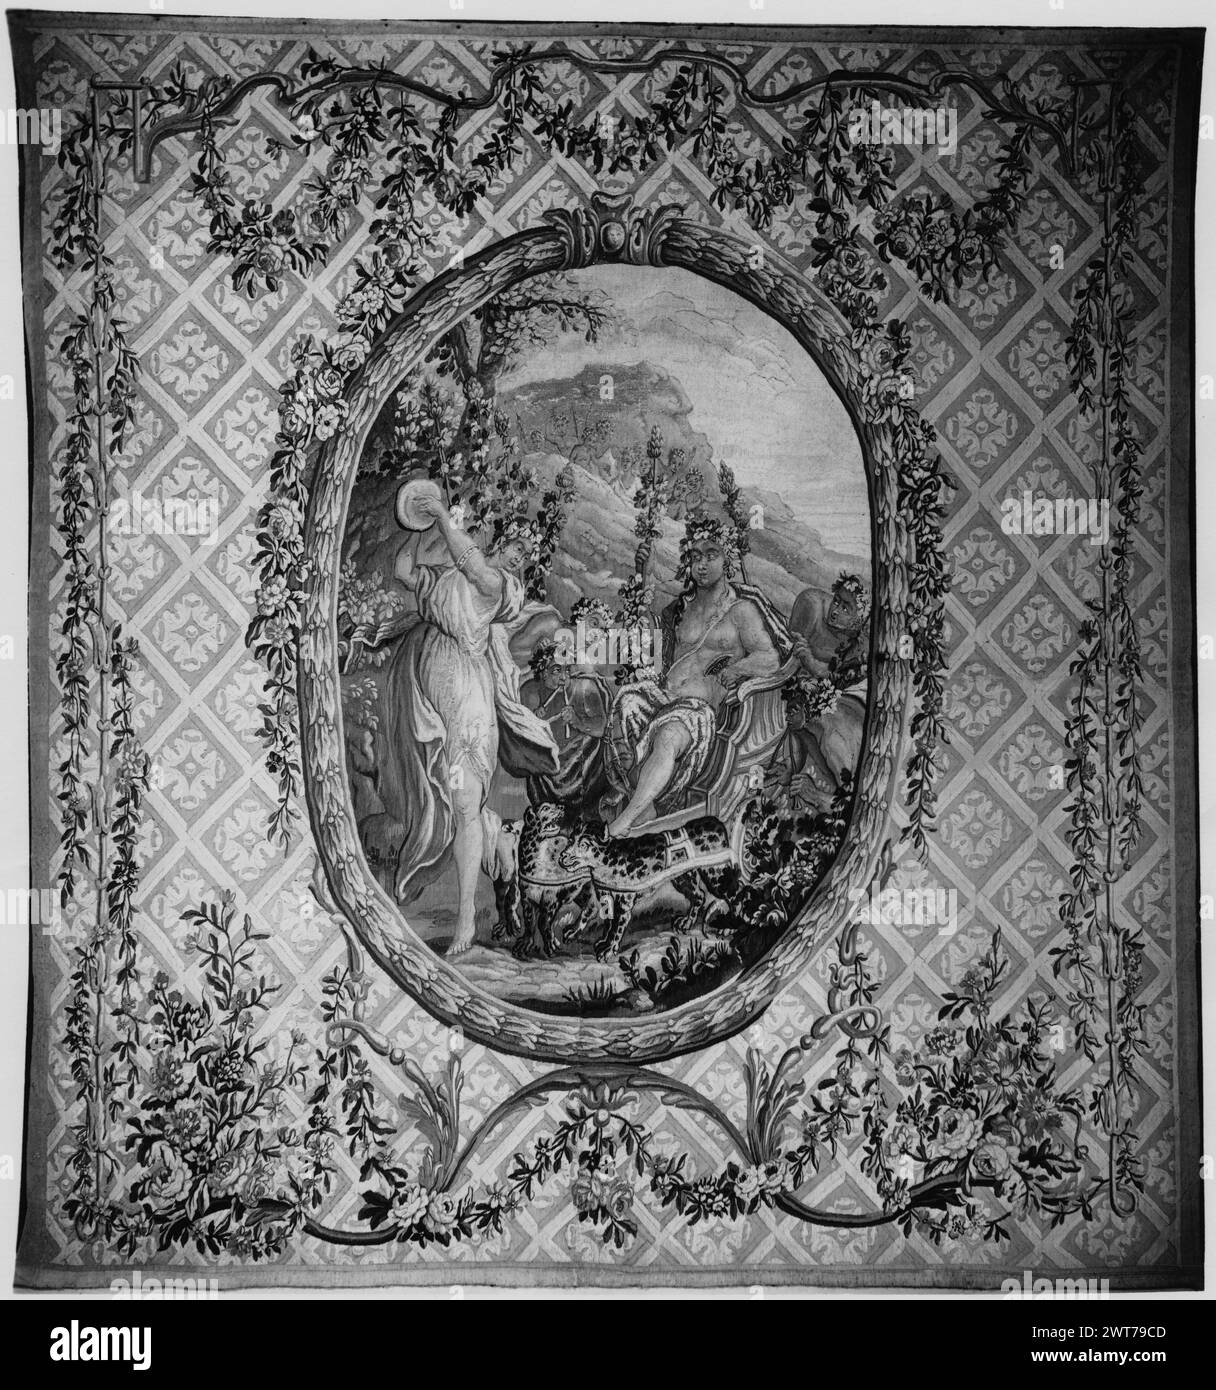 Triumph of Bacchus. Vien, Joseph Marie (the Elder) (French, 1716-1809) (designed after) [painter] c. 1770-1790 Tapestry Dimensions: H 7'4' x W 7'3' Tapestry Materials/Techniques: unknown Culture: French Weaving Center: Aubusson Ownership History: Jacques Seligmann & Co. In medallion framed by laurel-wreath frame (ALENTOUR) trellis ground with rosettes in lozenge openings, decorated with delicate garlands The name 'E. Le Roux' appears on verso. Related Works: Compositionally similar tapestry: GCPA 0240413 Stock Photo